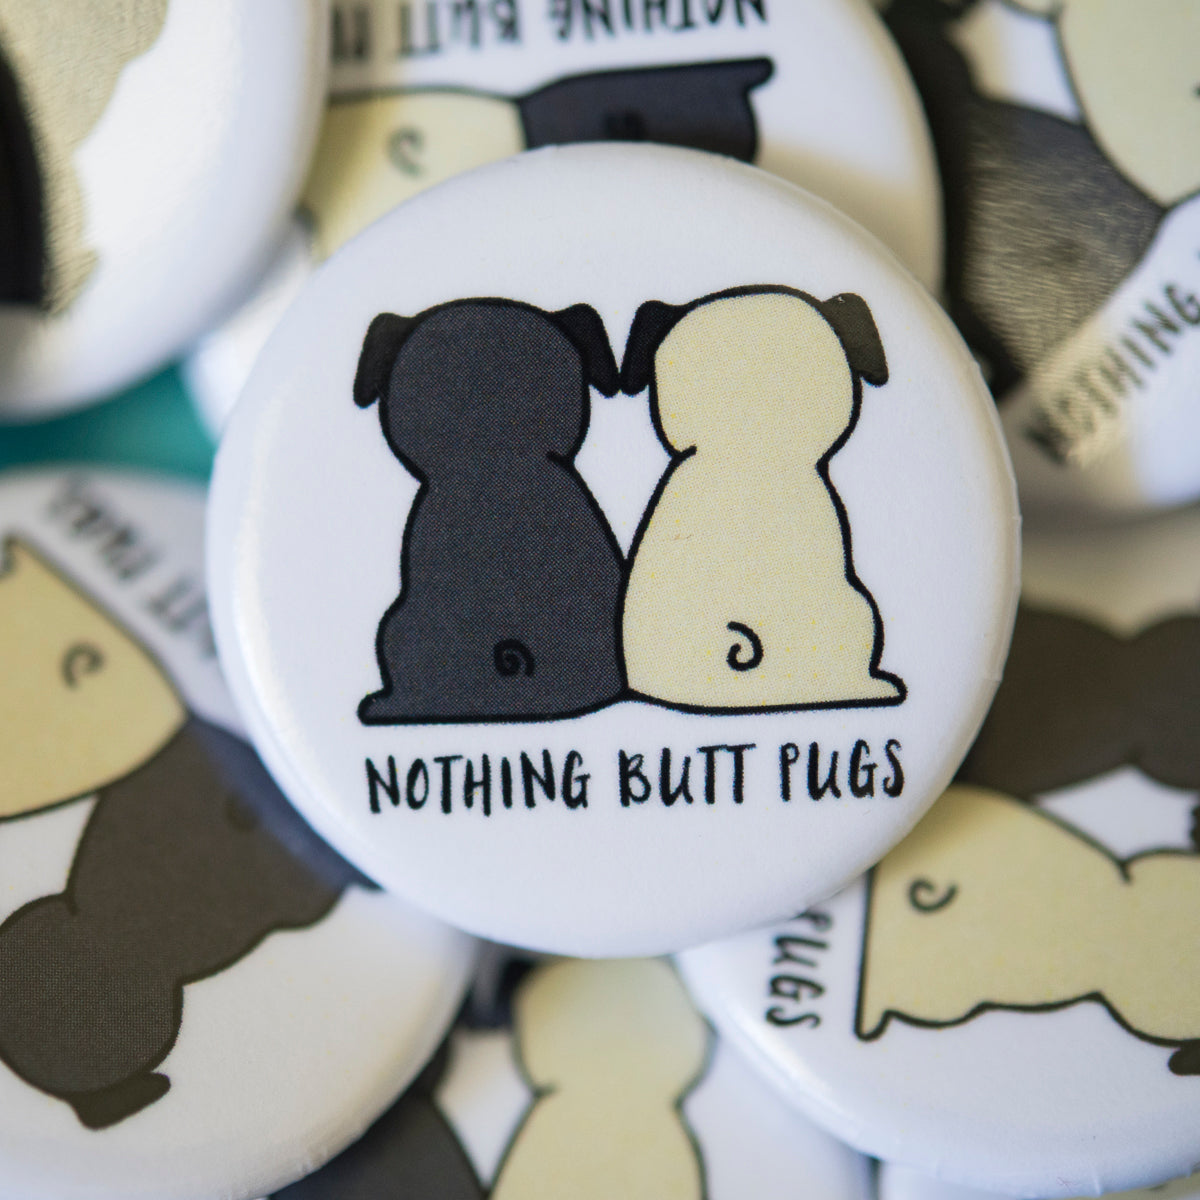 Nothing Butt Pugs Badge